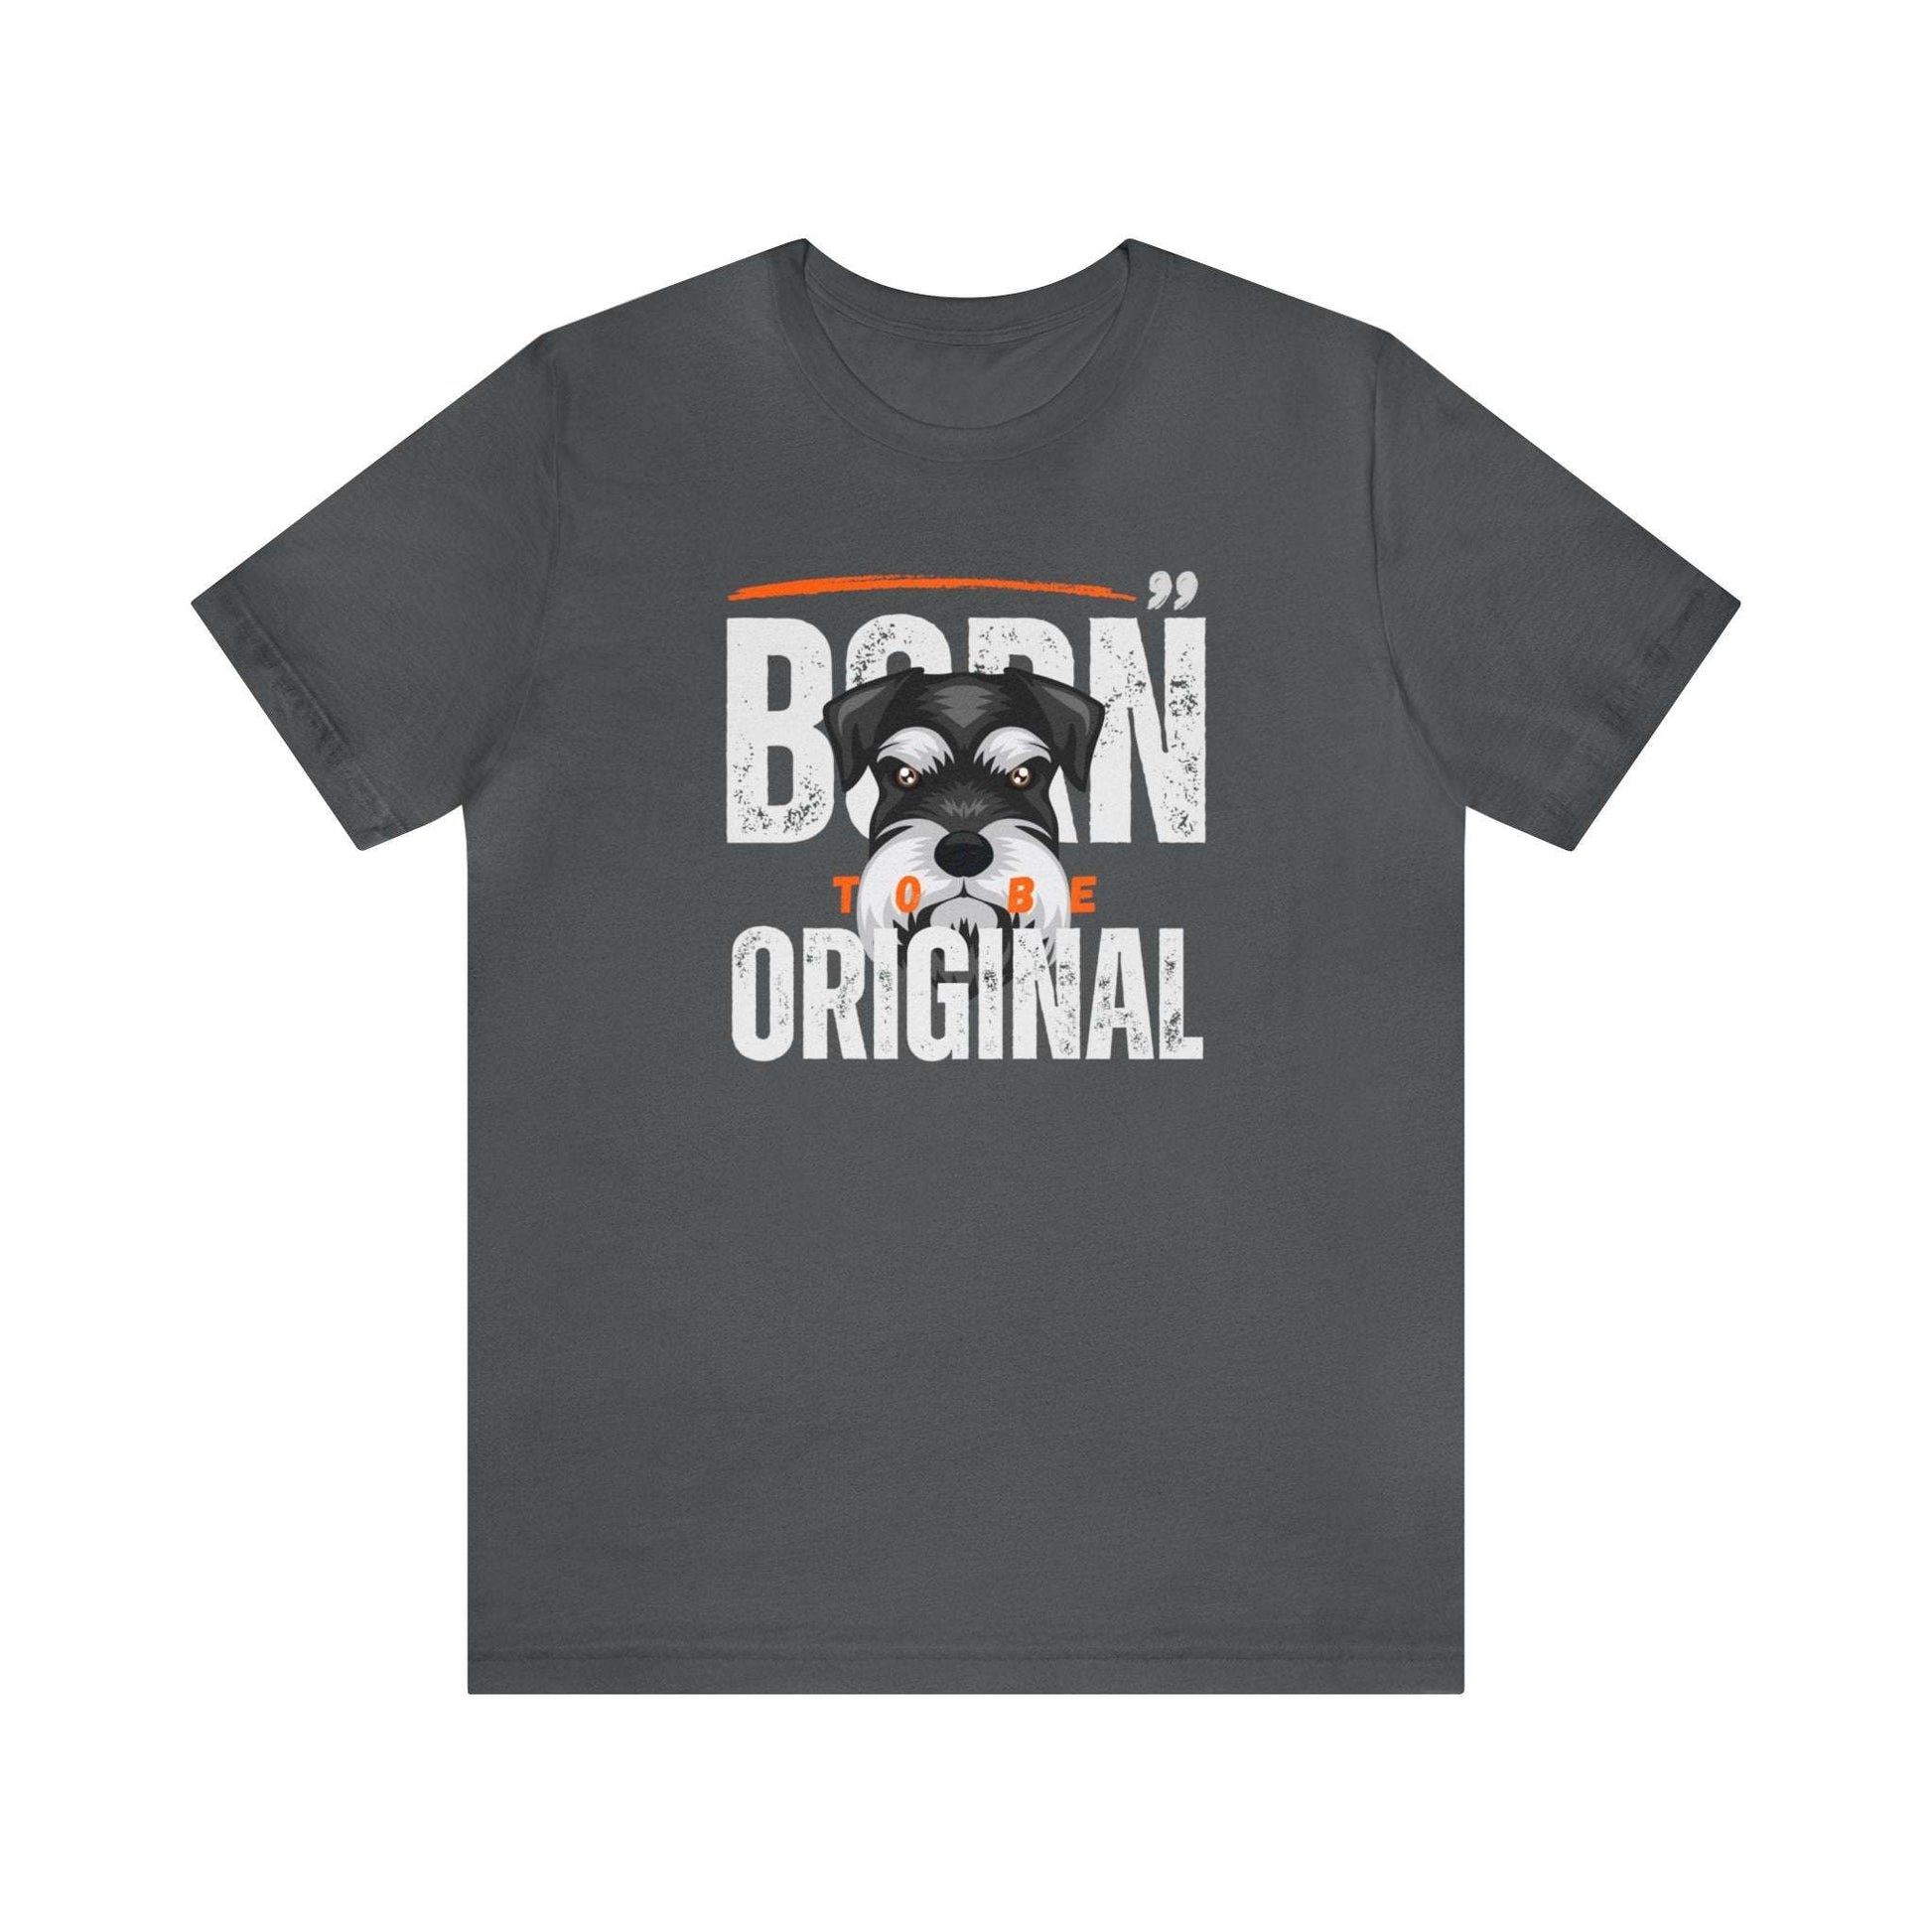 Fabulous Tee Shirts' ' Born to be Original ' grey t-shirt displayed to emphasize its unique design and premium quality.